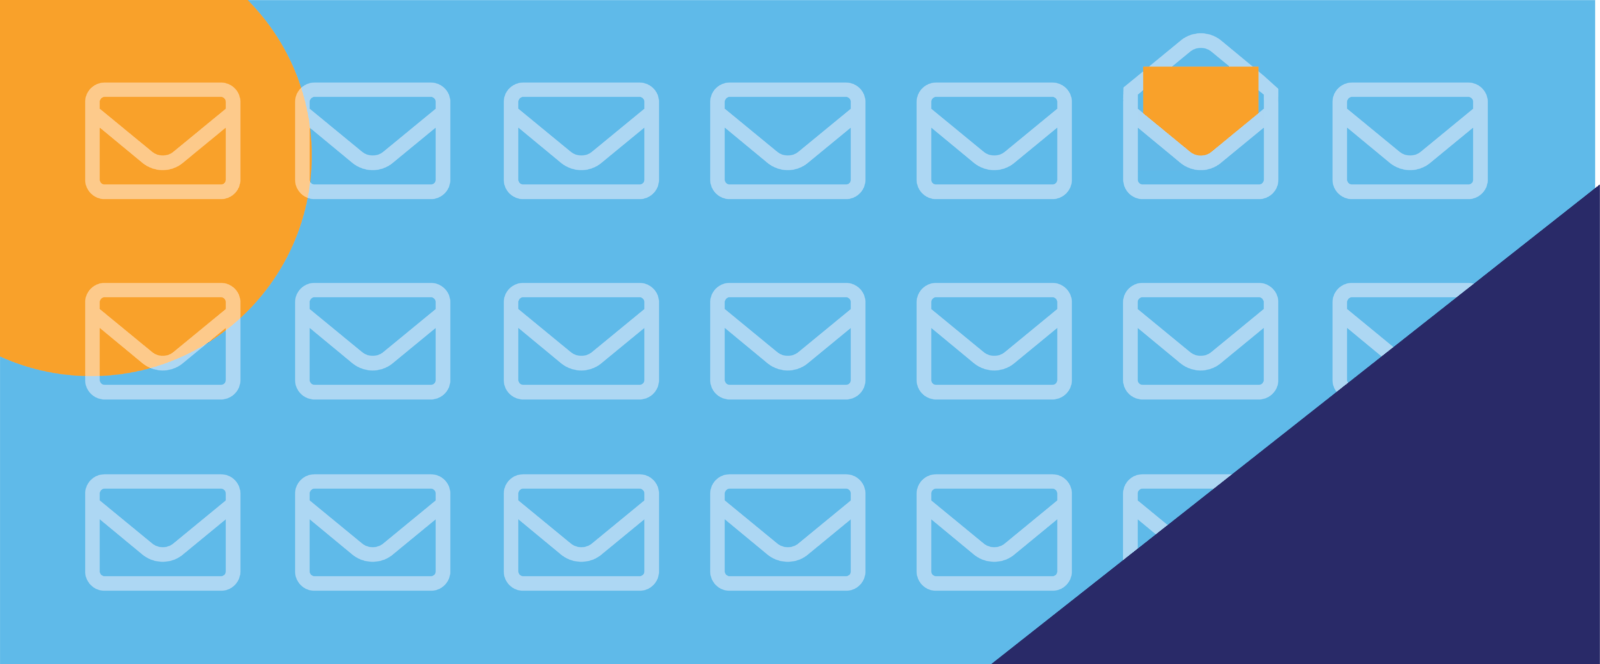 An illustration of various envelopes representing emails